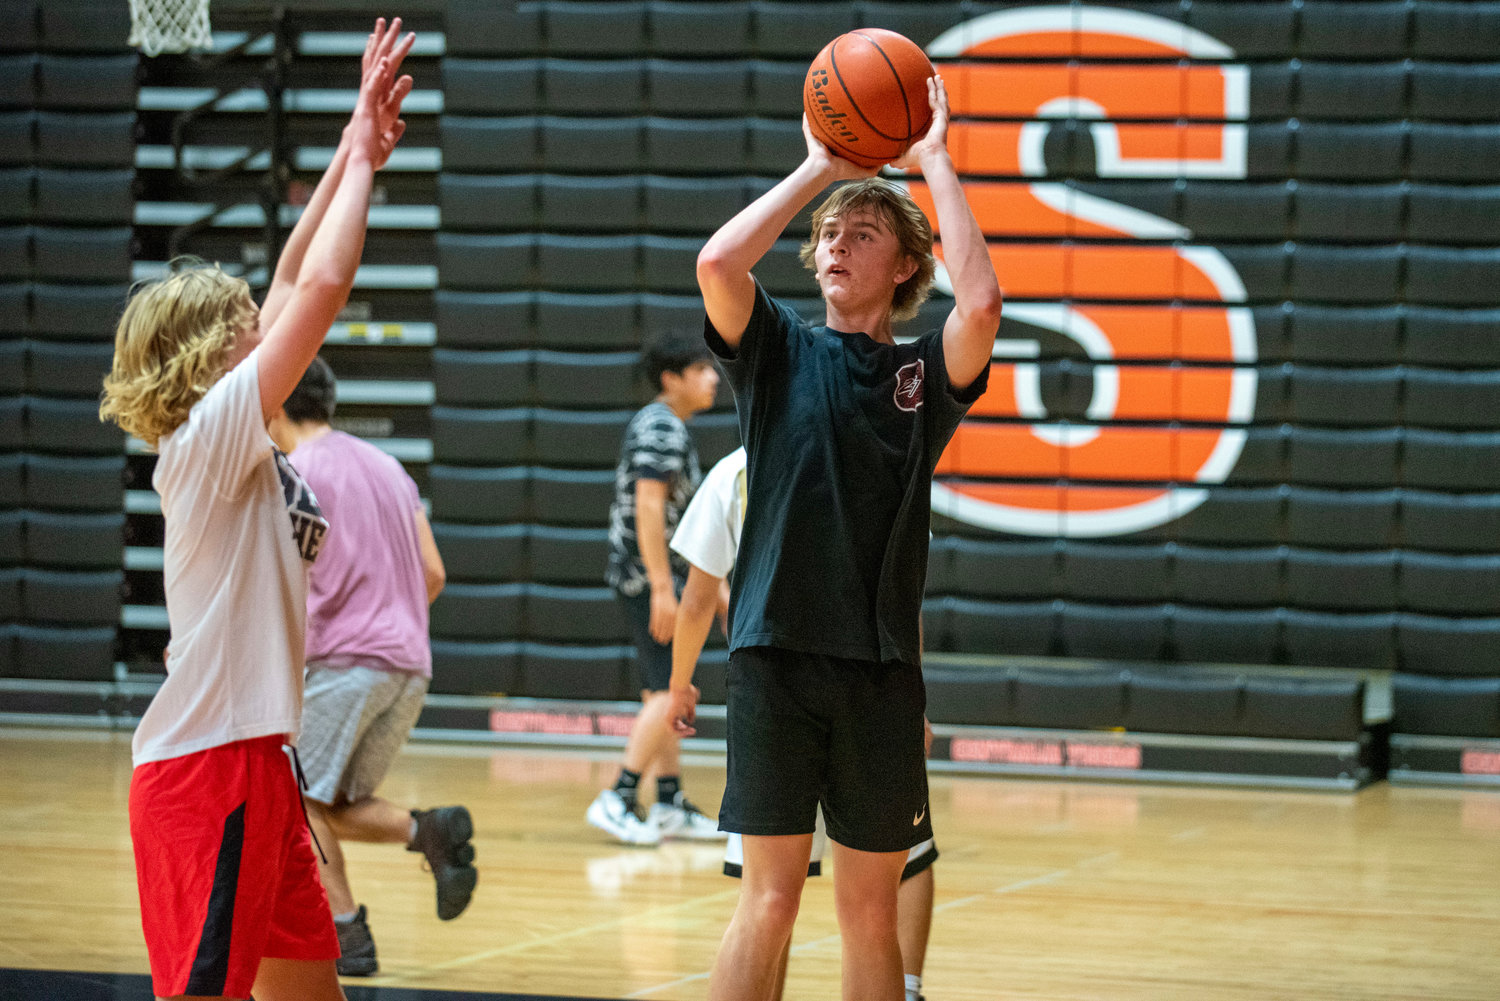 Centralia sophomore Cohen Ballard shoots while Von Wasson puts his hands up during practice Tuesday.